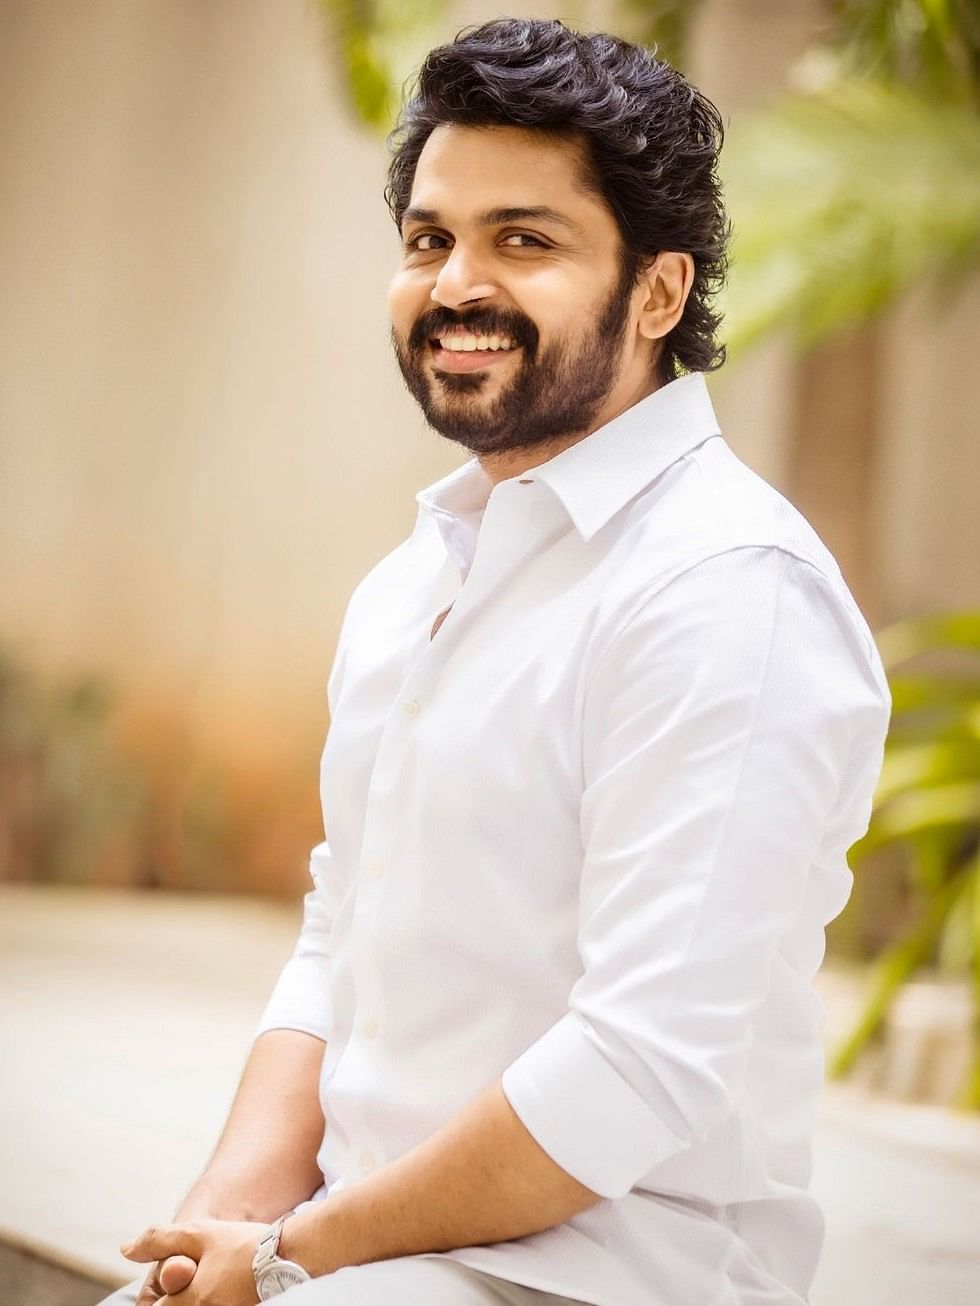 Tamil actor Karthi dreamed of becoming a filmmaker and worked under Mani Ratnam in the film Ayutha Ezhuthu.  